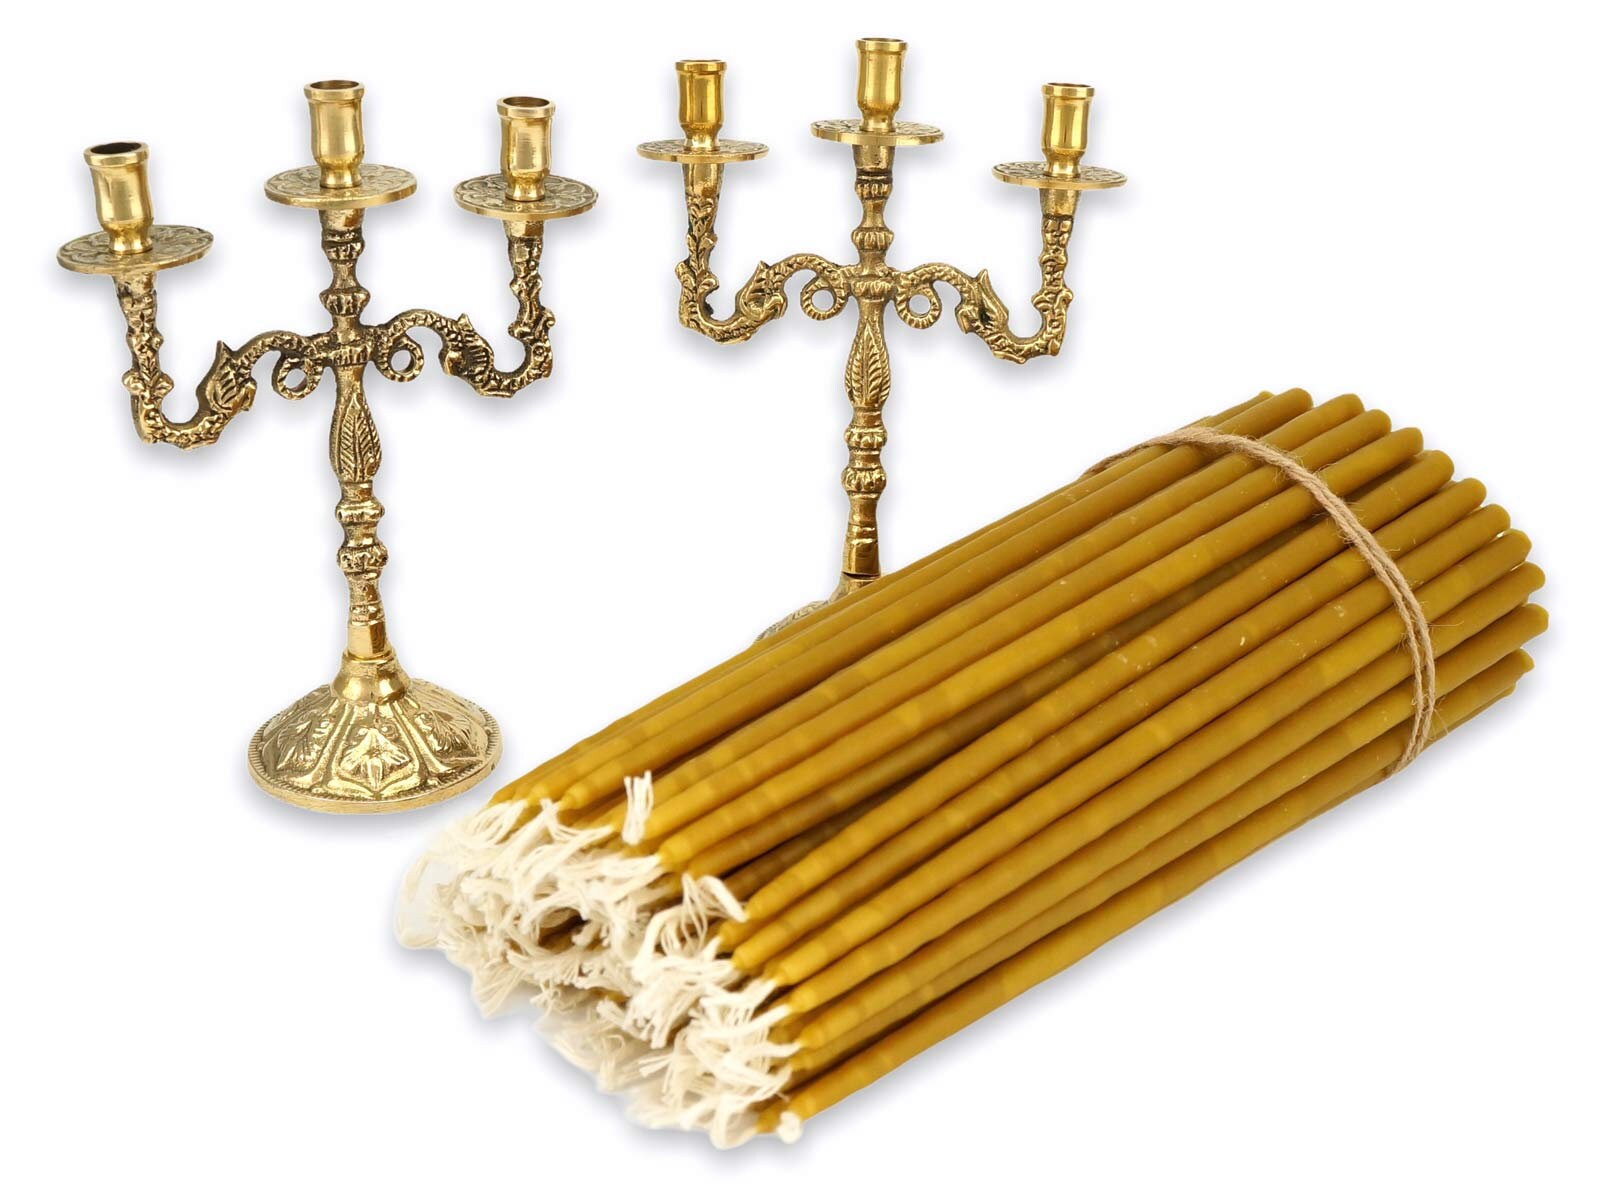 Paraffin Candle Wicks for Orthodox Vigil Oil Lamps